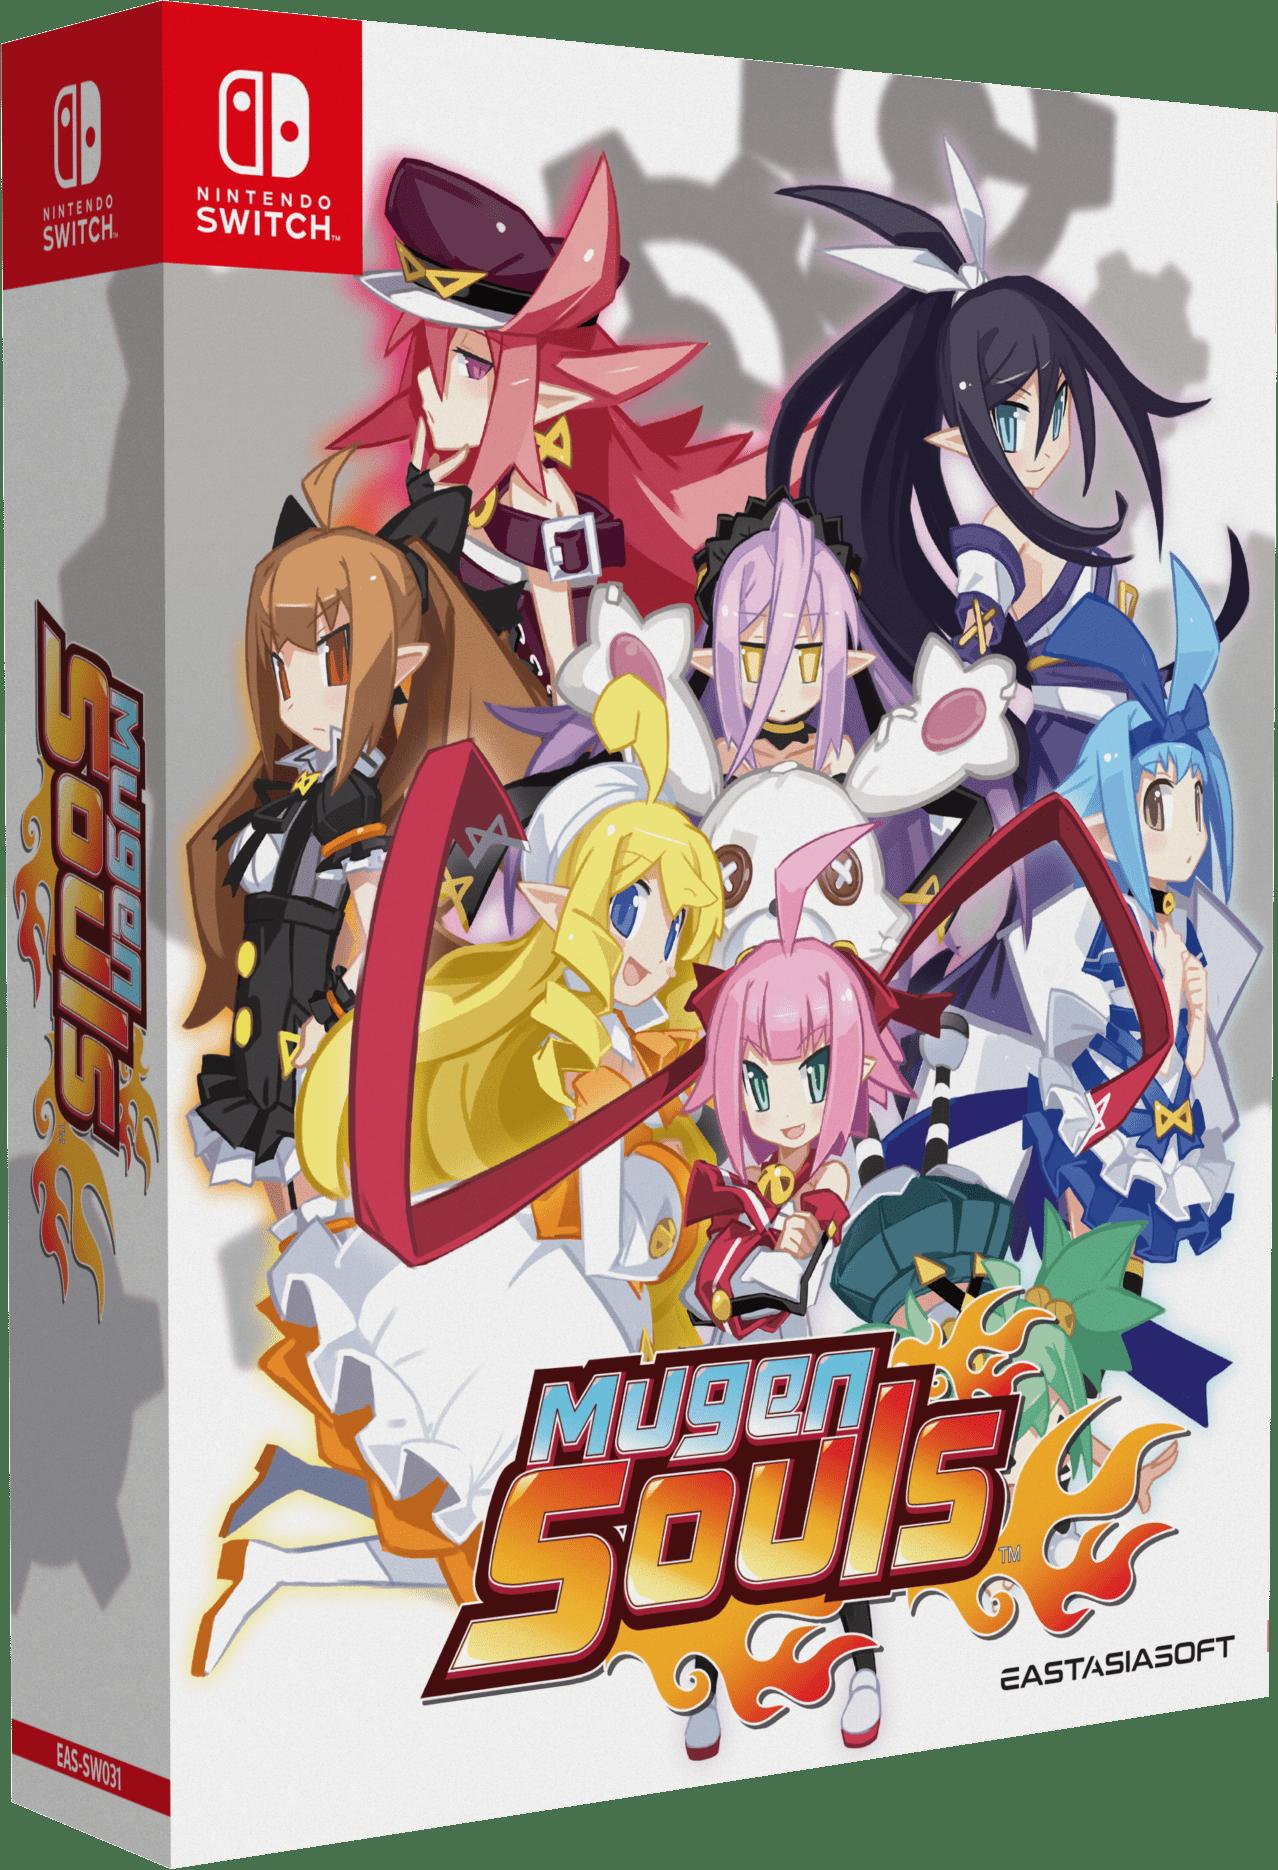 Mugen Souls Z' launches on Nintendo Switch next month